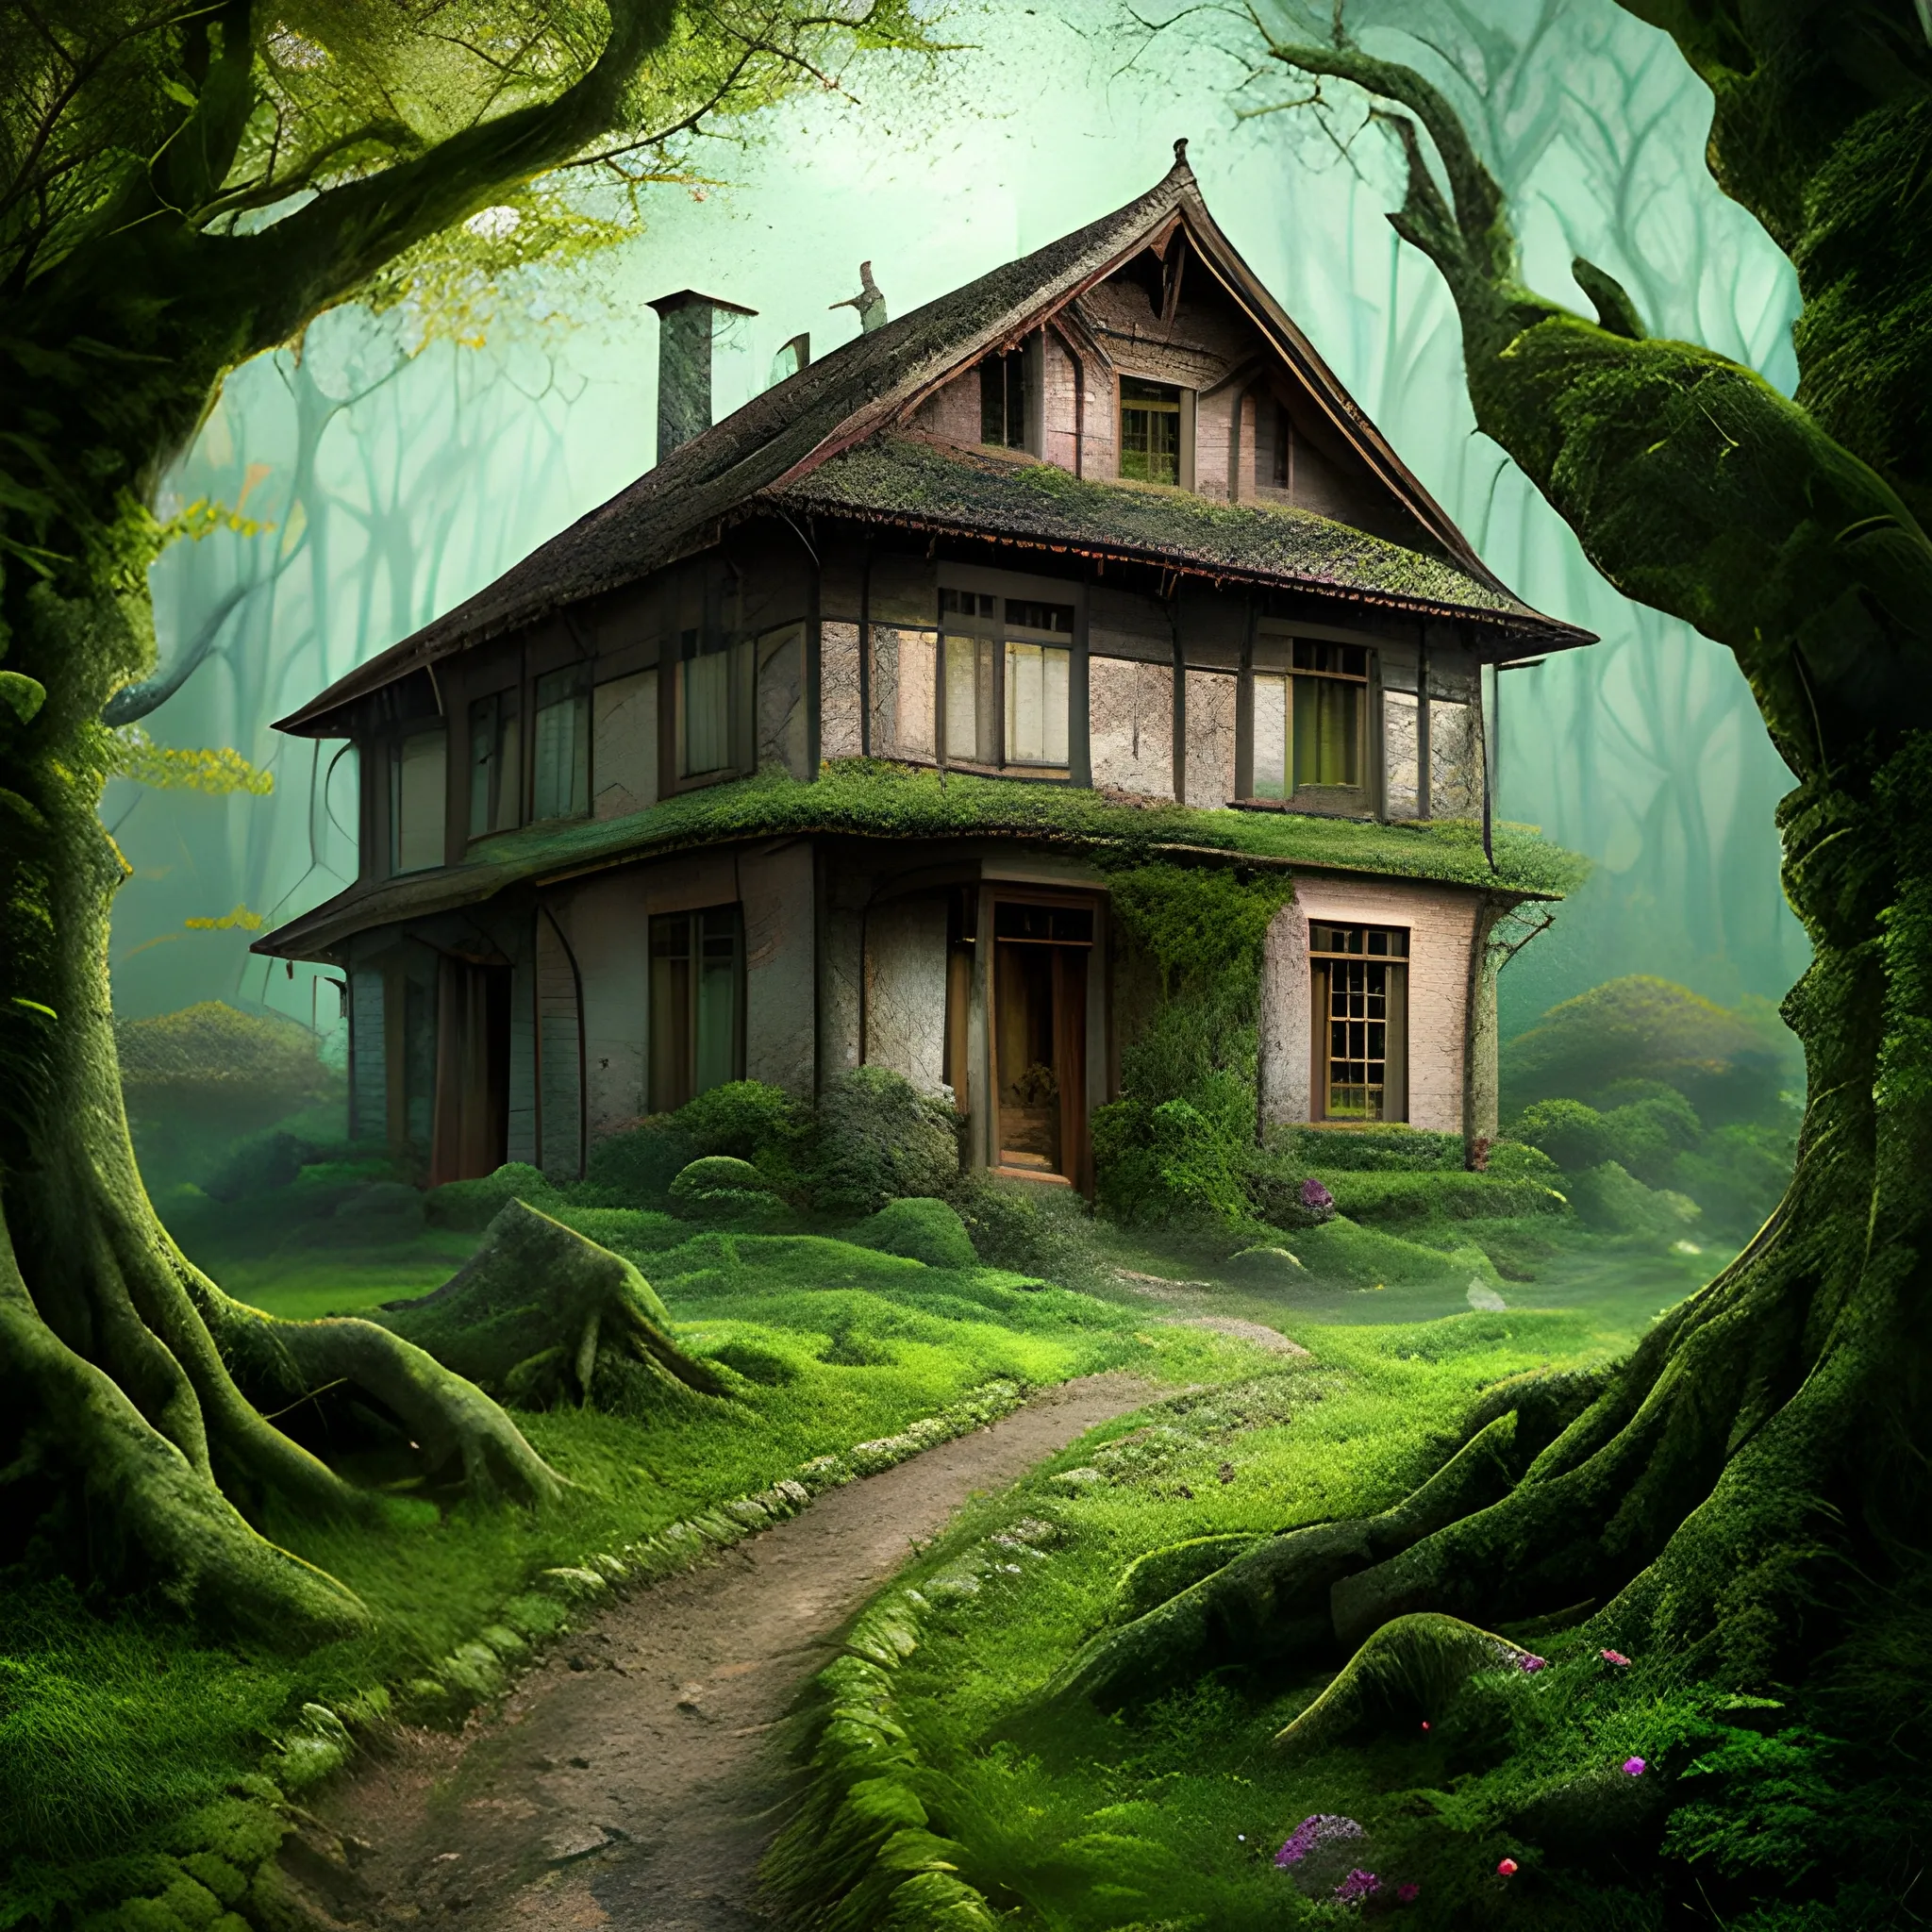 Image Elements: Dense forest, old house, four children (different ages and appearances), curious and cautious expressions. , Realistic , vibrant